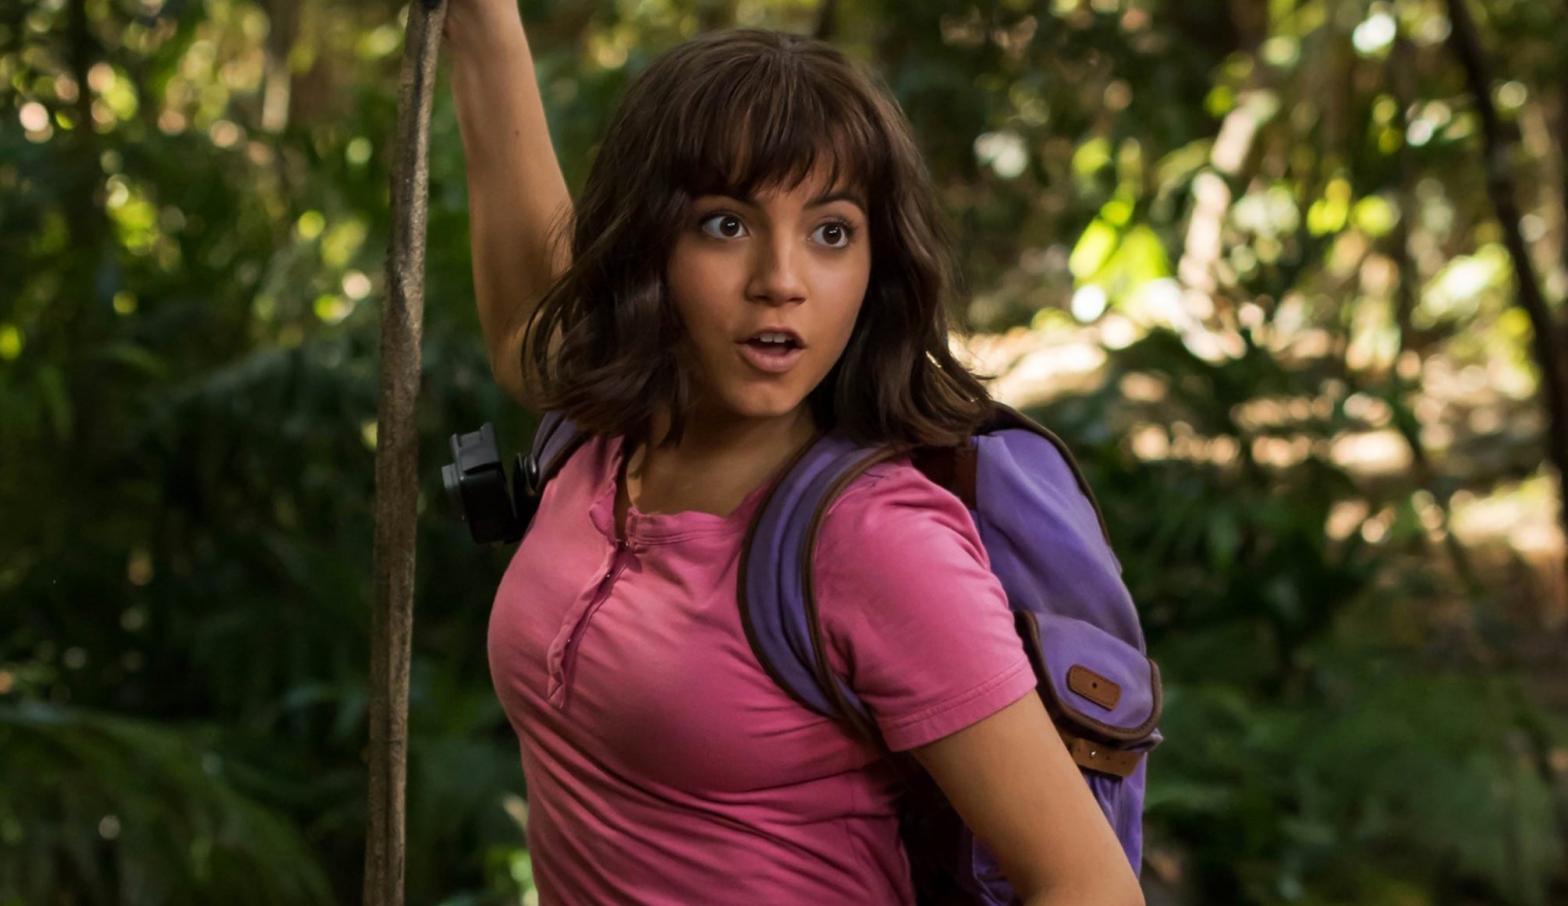 Isabela Merced, seen here in the Dora movie, is joining the Alien franchise. (Image: Paramount)